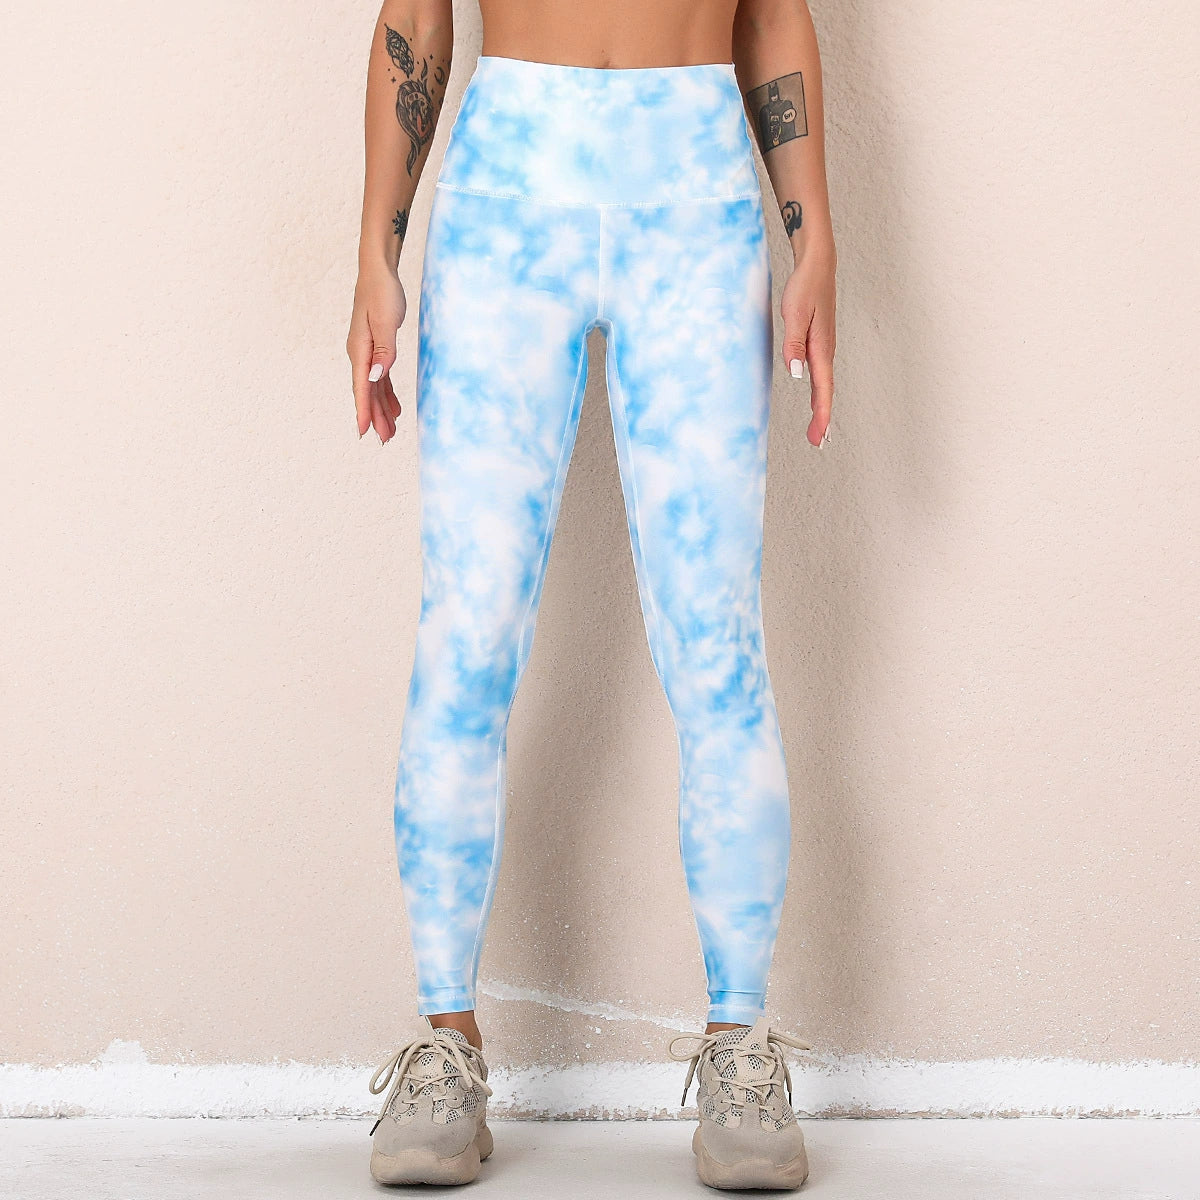 ! Export Fashion Digital Print Tie-Dyed Hip-Lifting Yoga Pants Sports Running Fitness Pants Yoga Clothes for Women